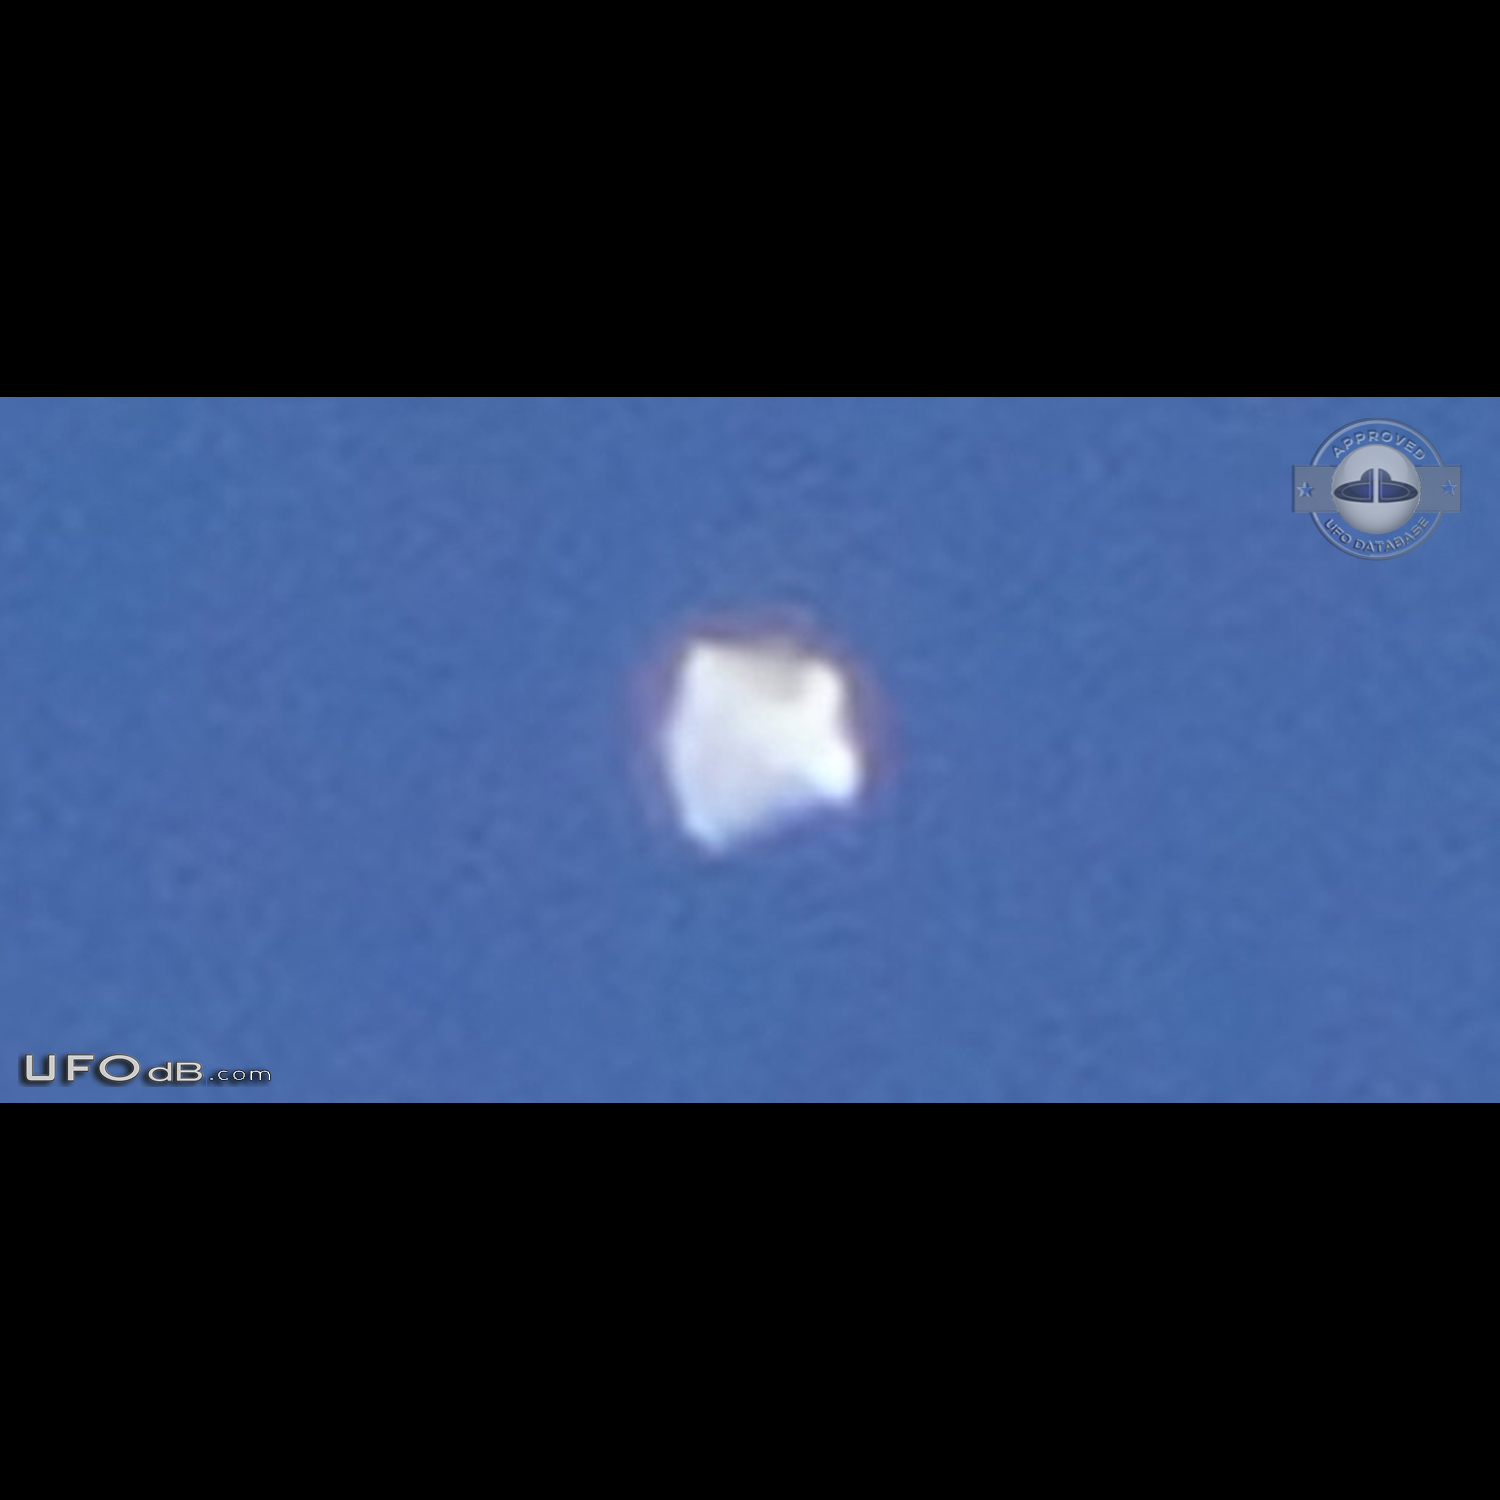 On the roof - man see flying UFO in Shahrekord Chaharmahal Iran 2015 UFO Picture #686-1